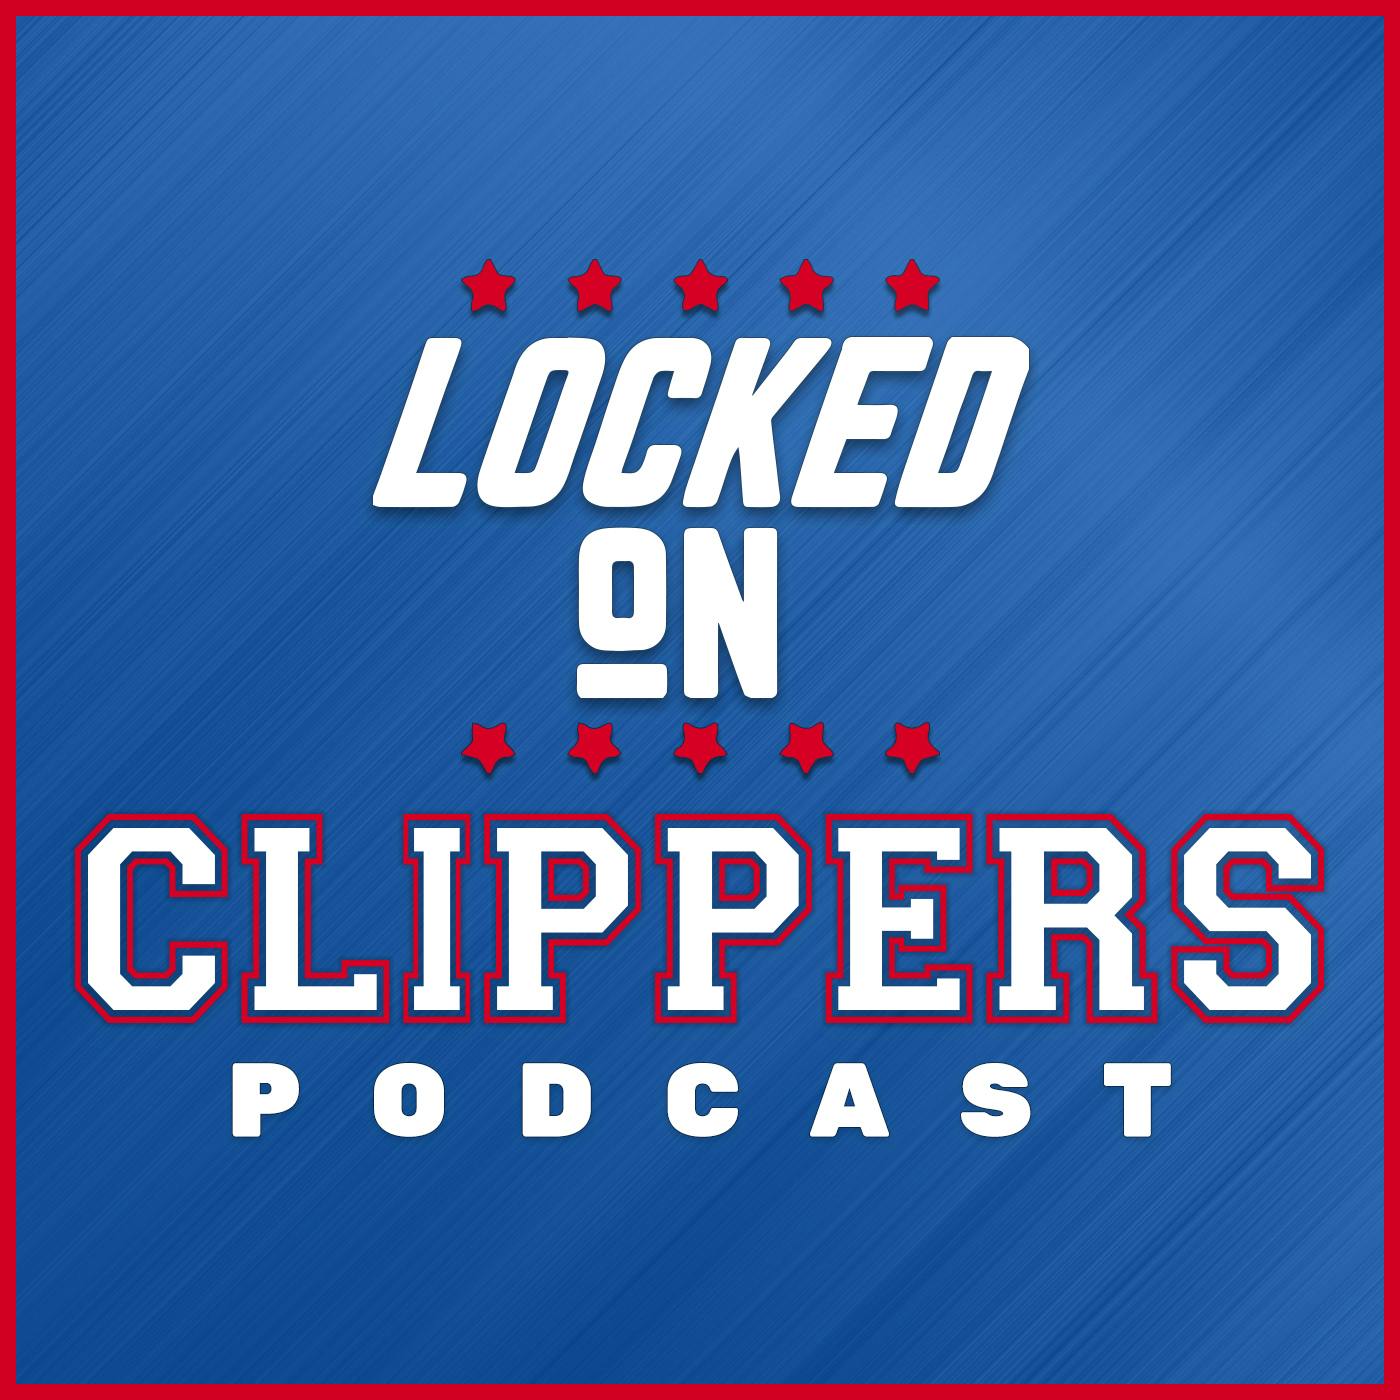 Brian Windhorst contrasts the Suns' backlash and the Clippers' previous  backlash